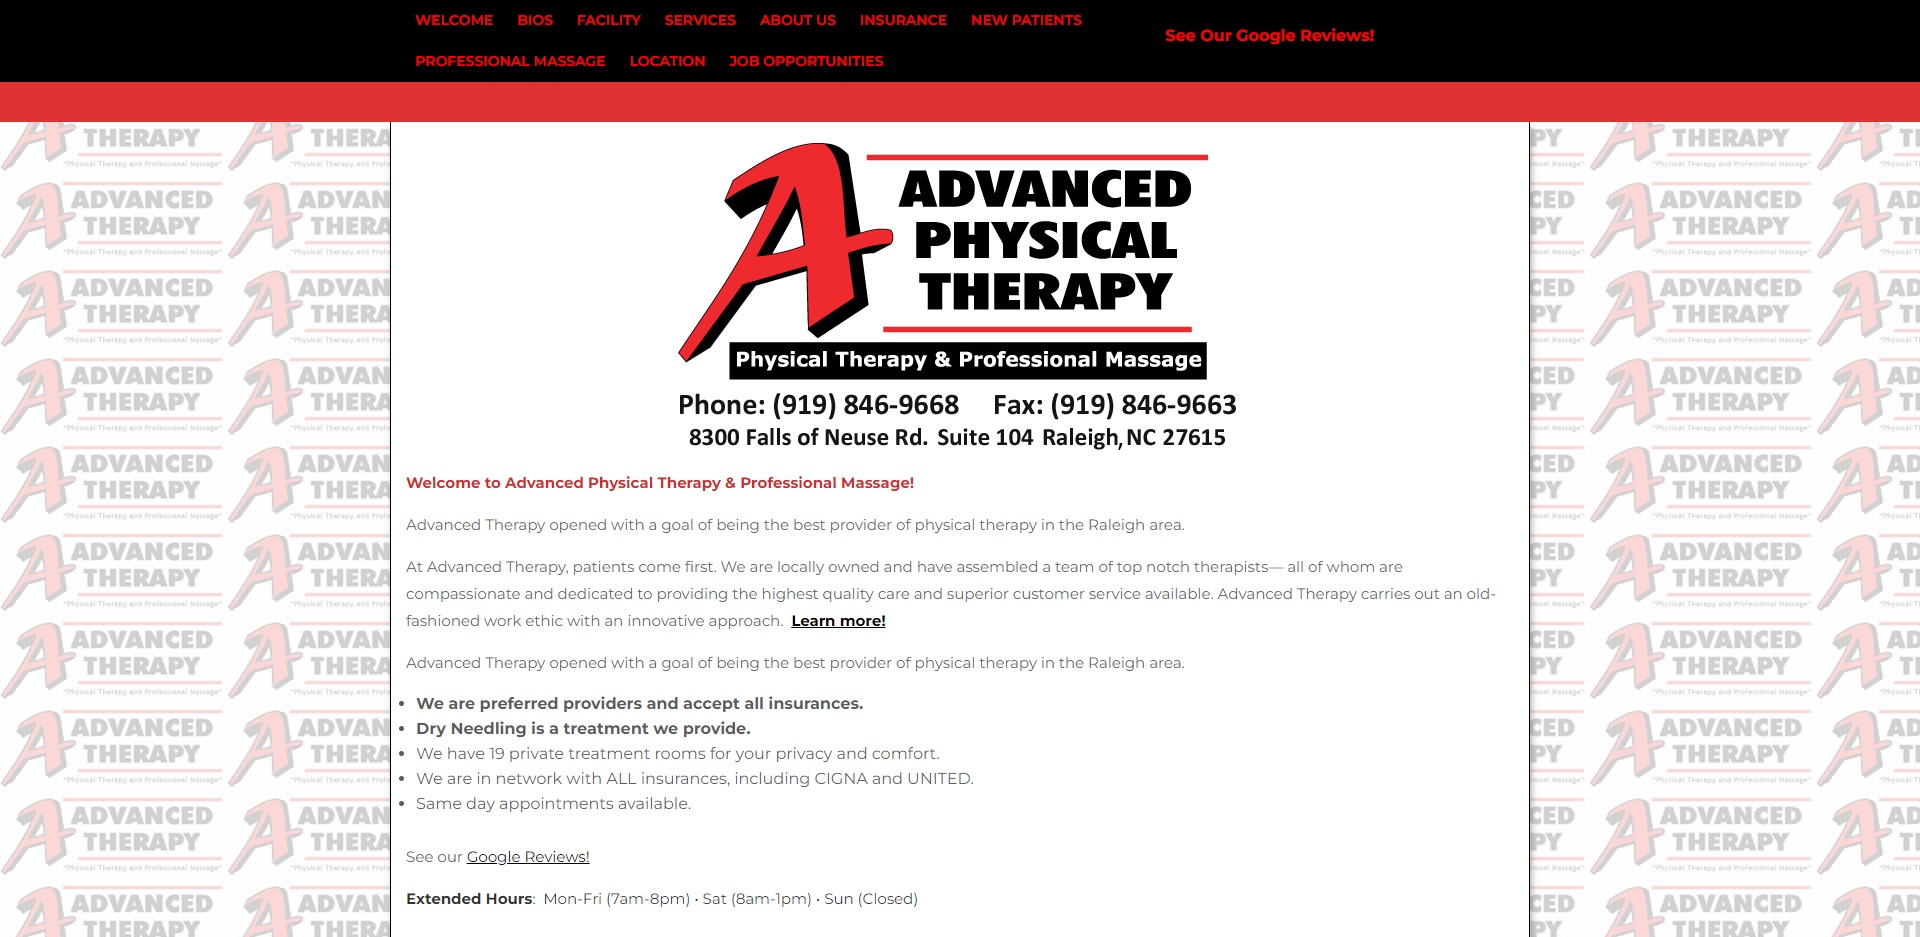 The Best Physiotherapy in Raleigh, NC